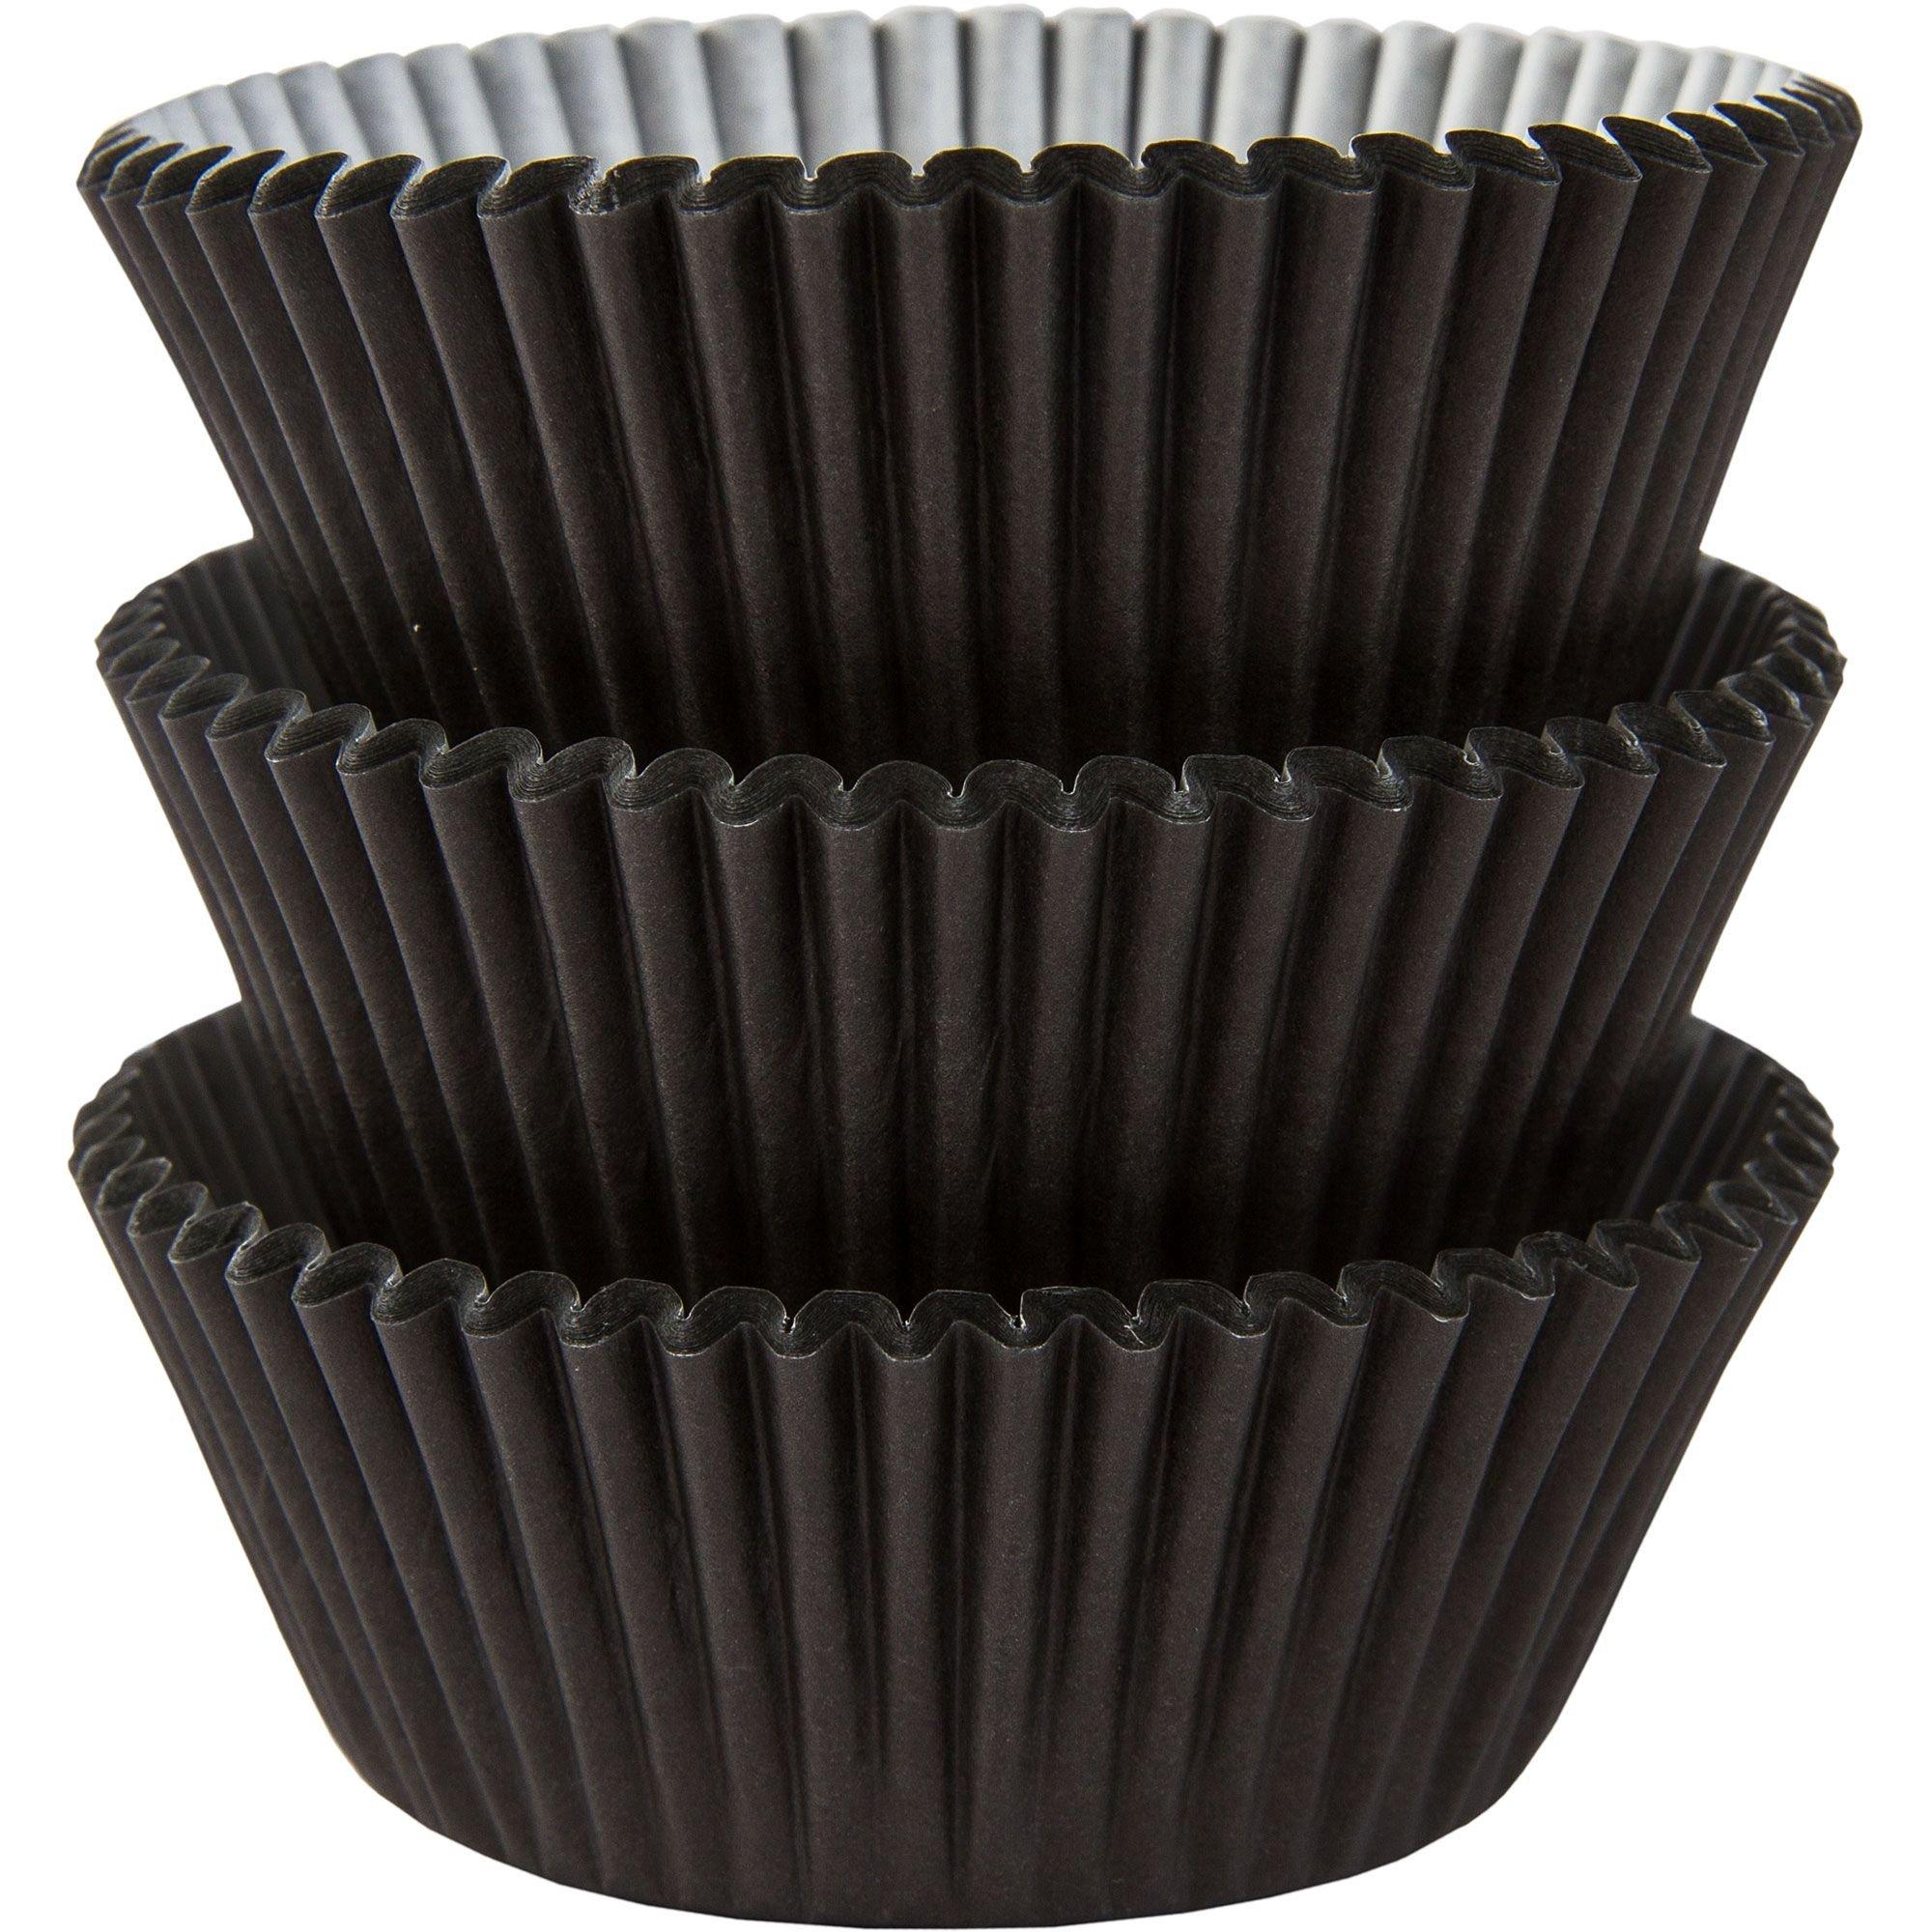 Baking Cups & Cupcake Liners